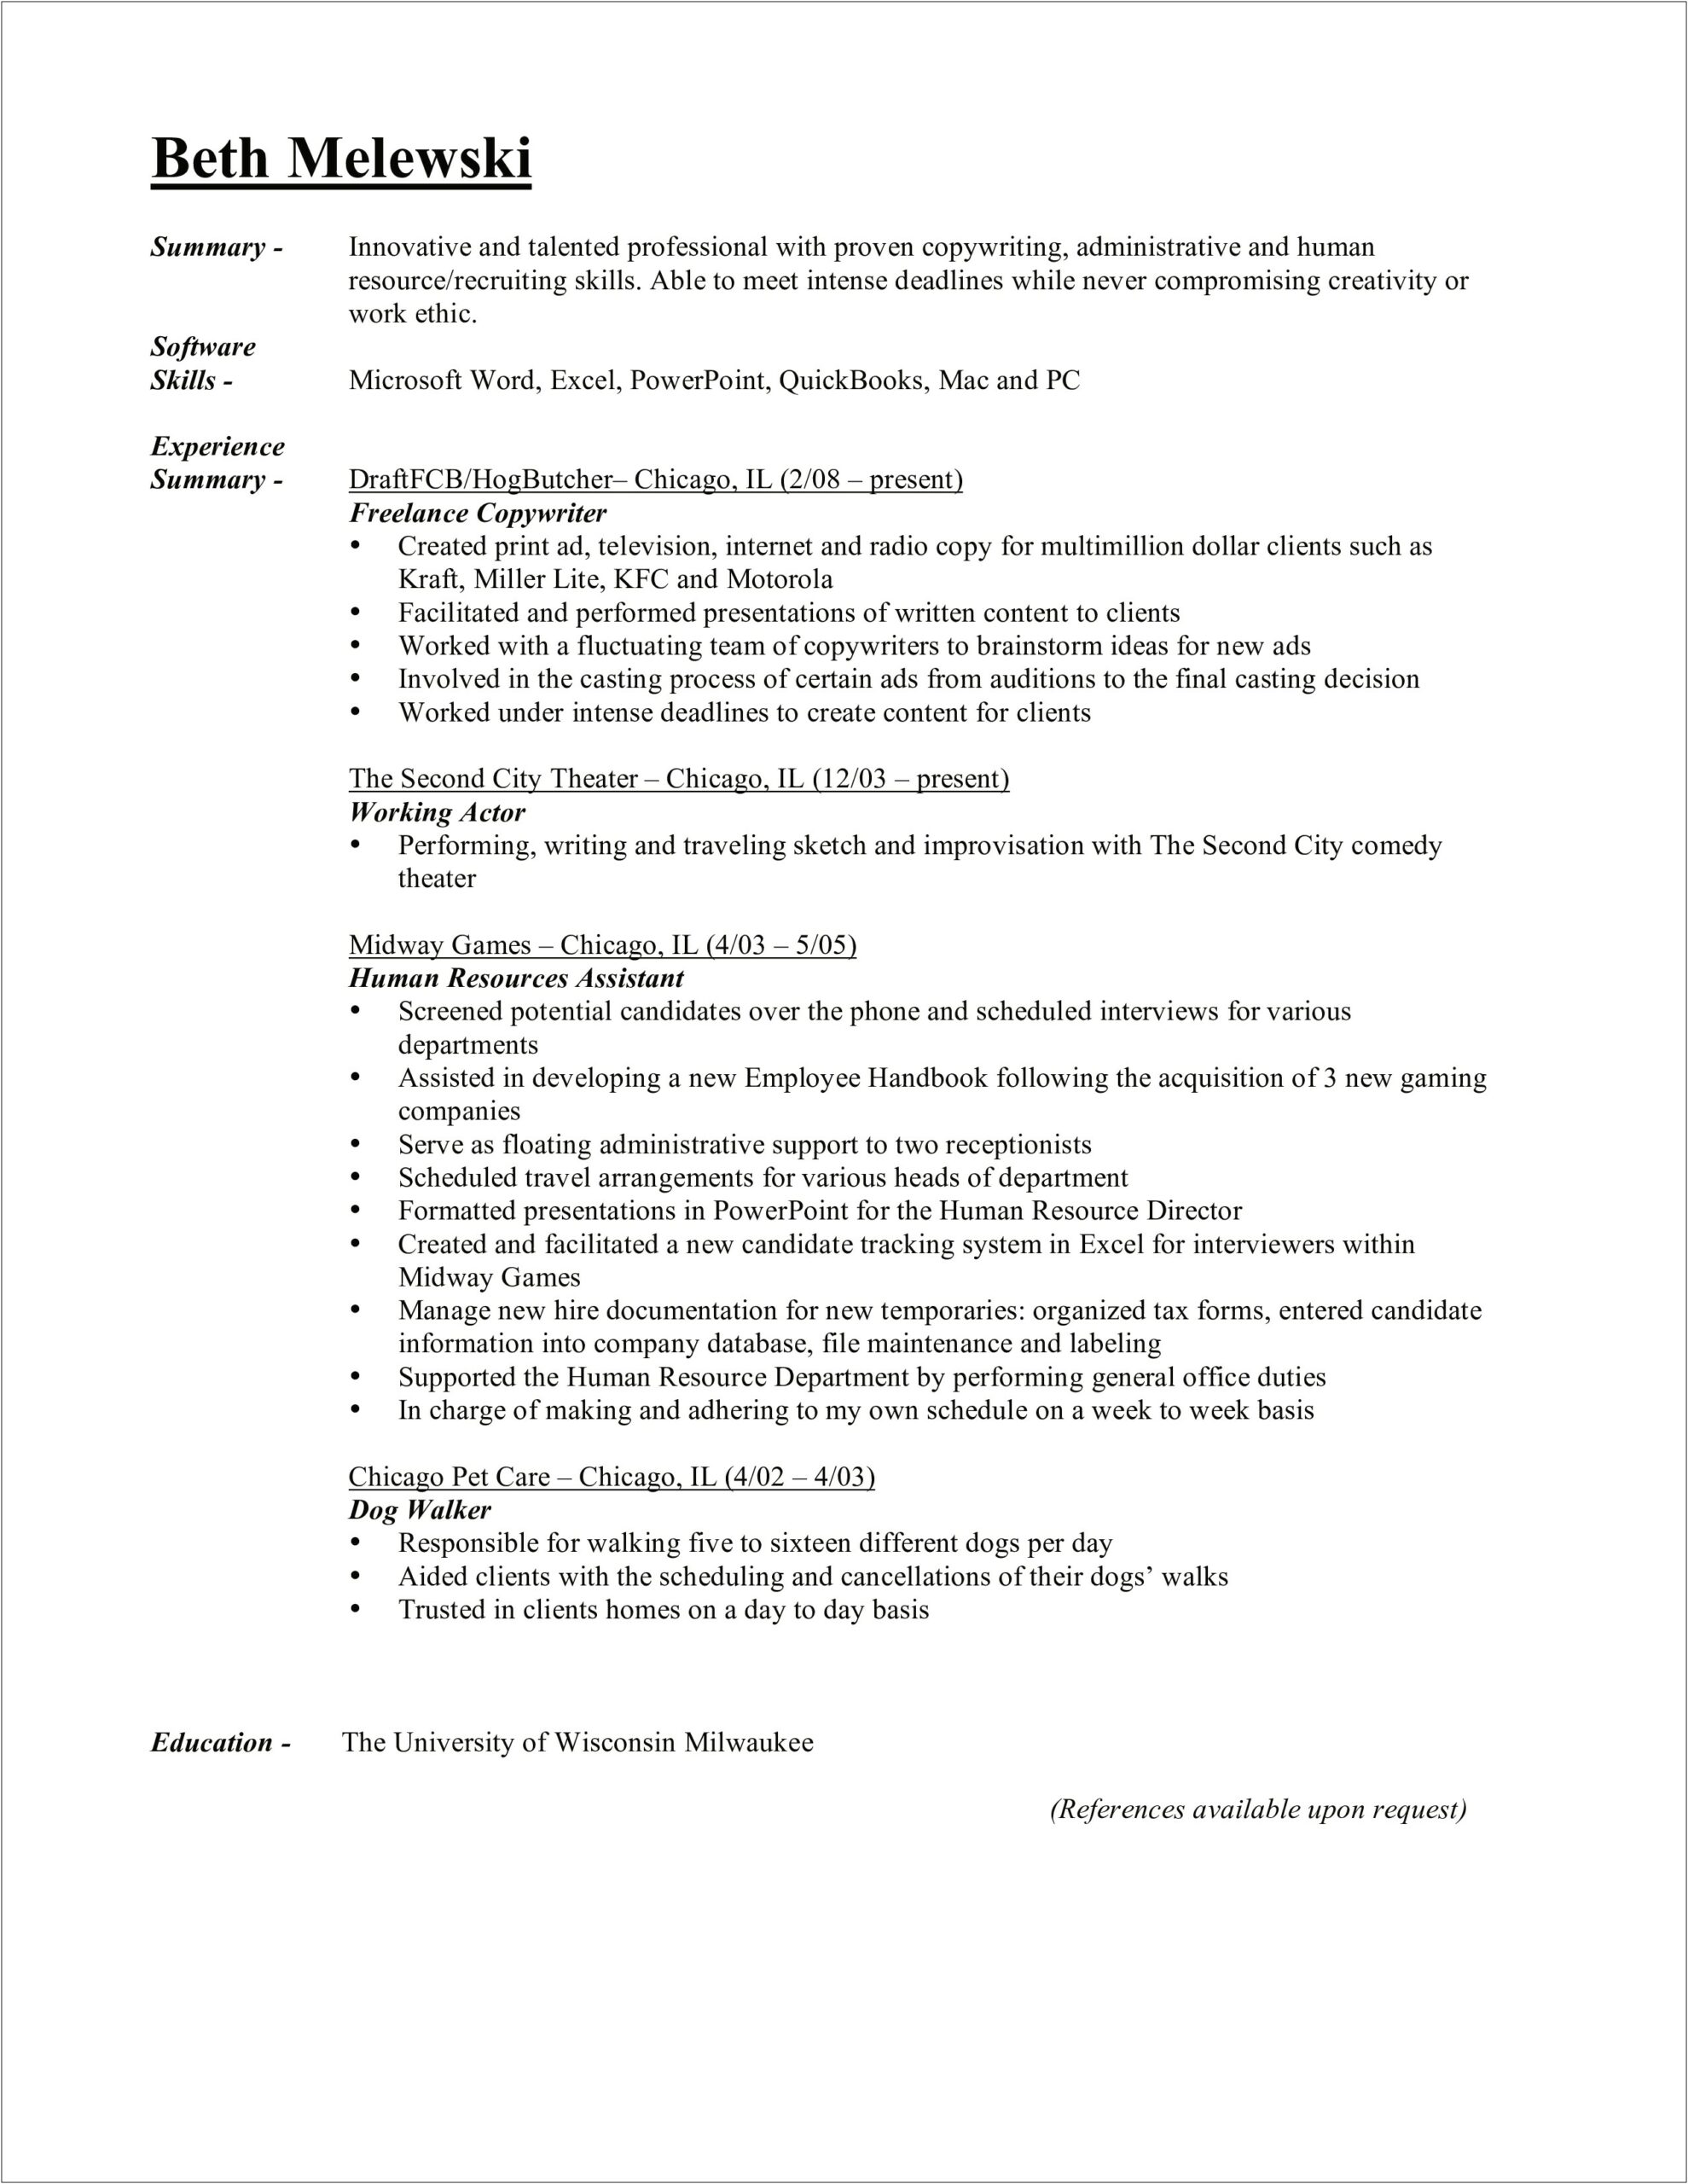 Resume Sample References Upon Request